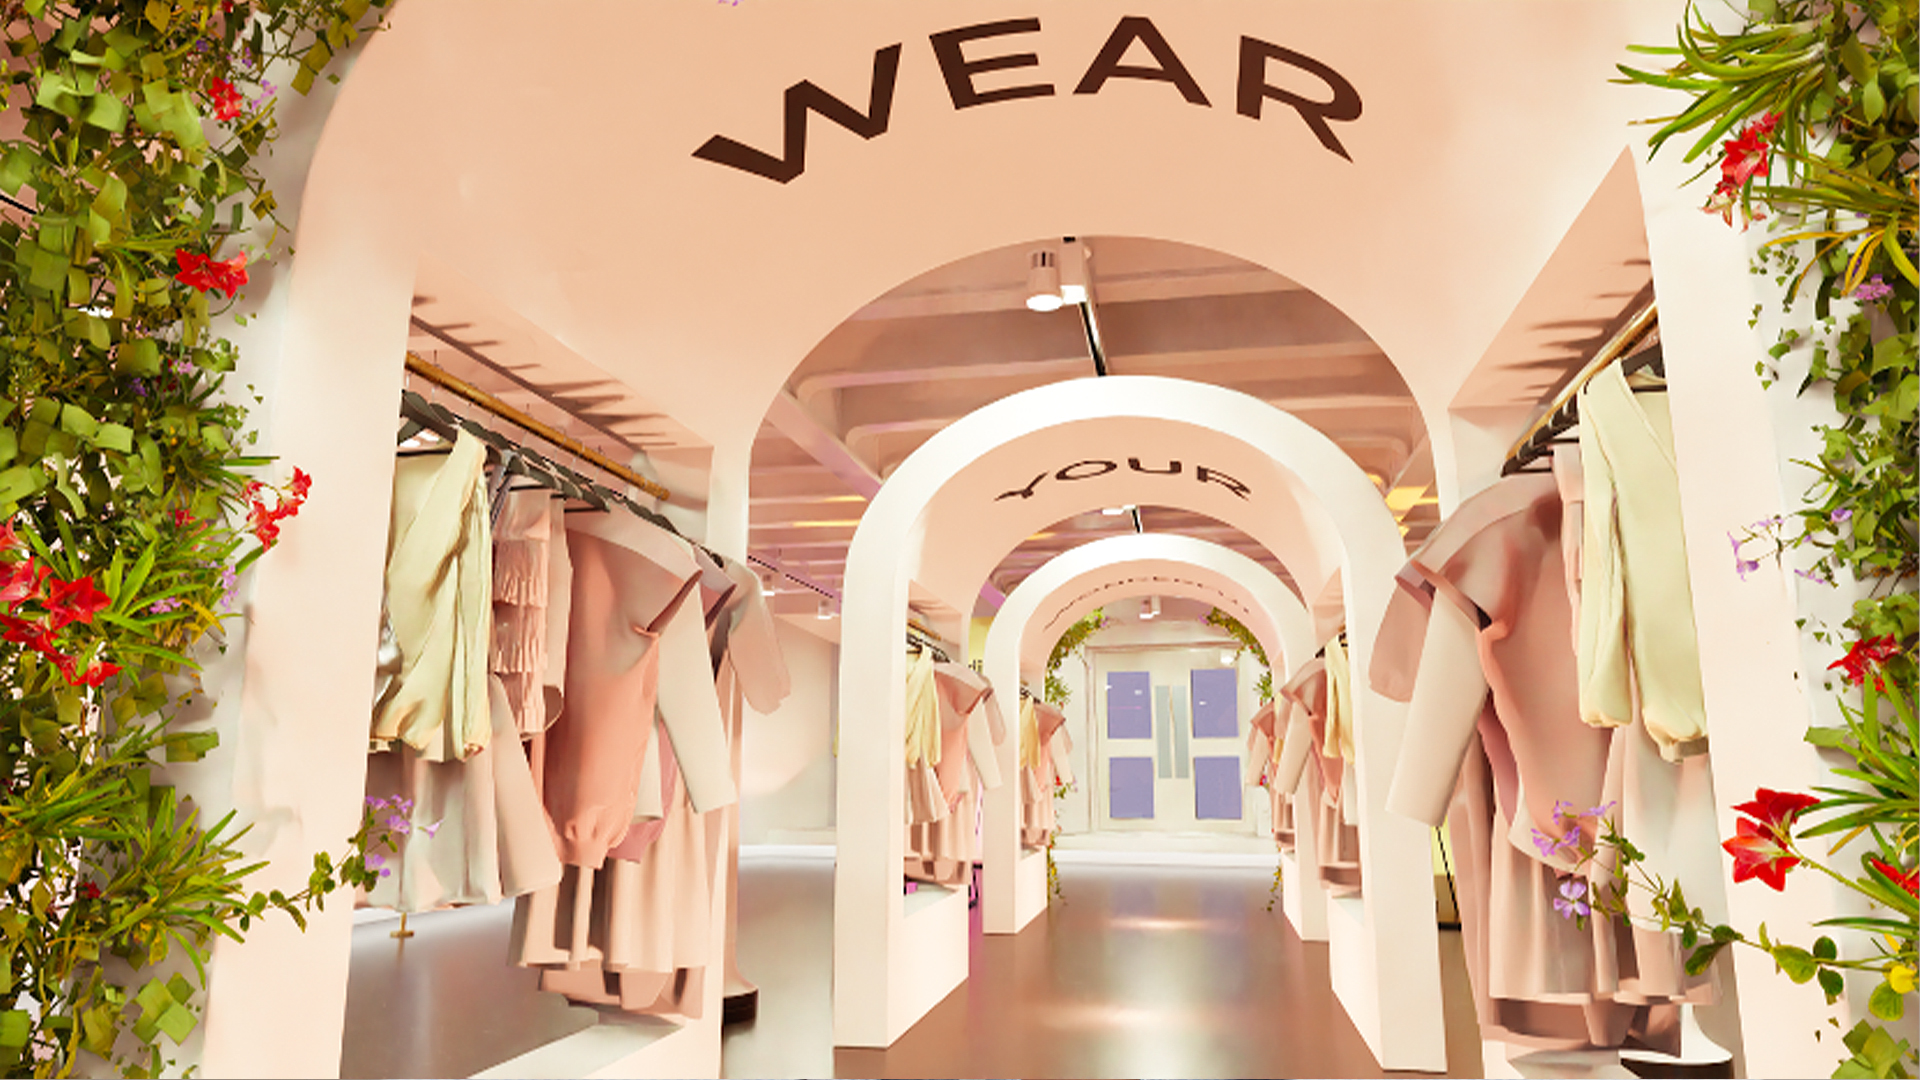 Shein and Klarna to open pop-up store in Covent Garden 